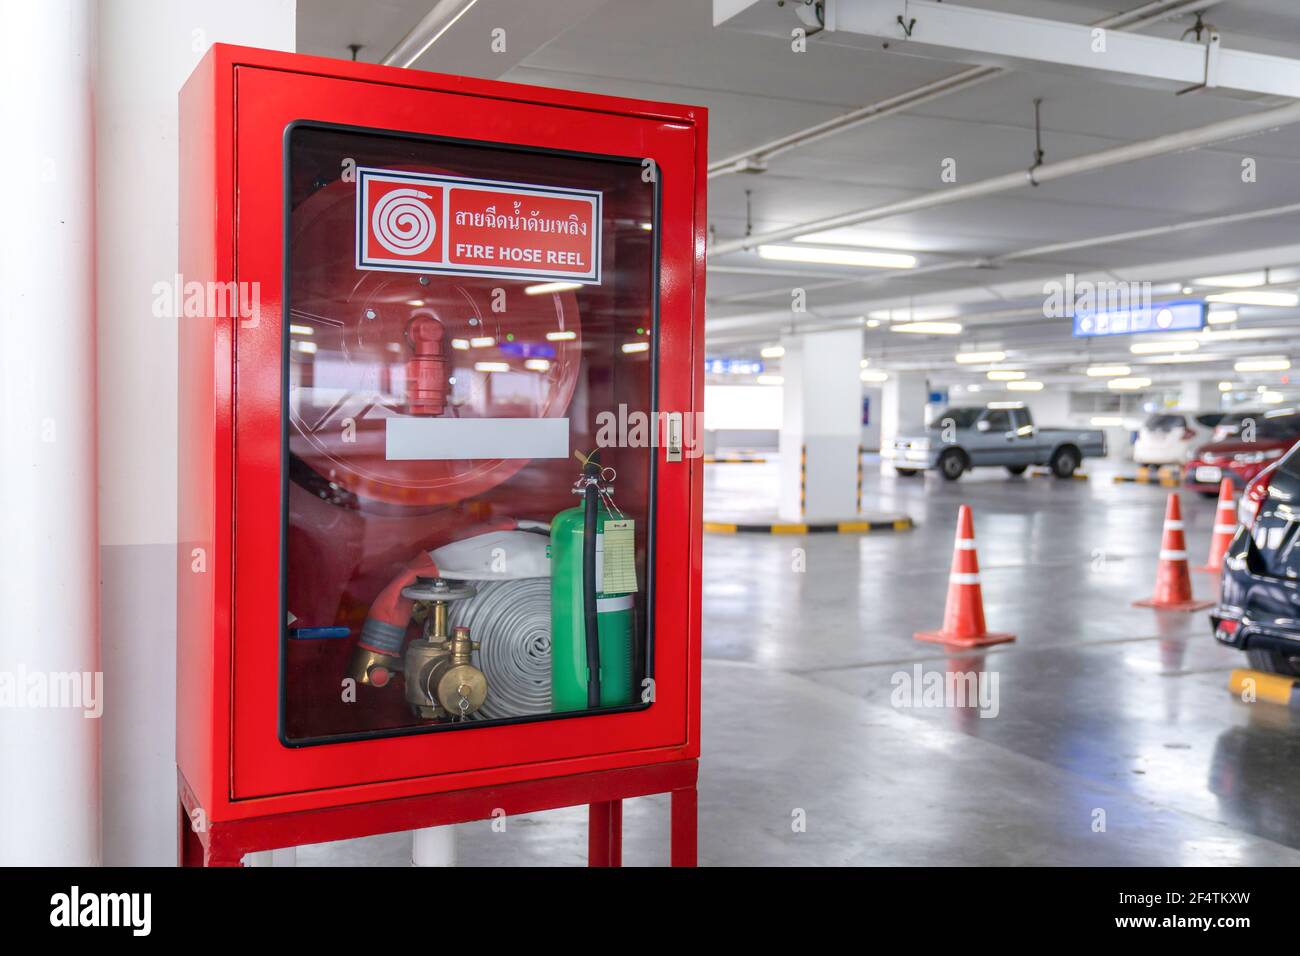 Fire Hose Reel box in the corner of Car Parking., The White Thai Language  letter in the middle of the red box means FIRE HOSE REEL Stock Photo - Alamy